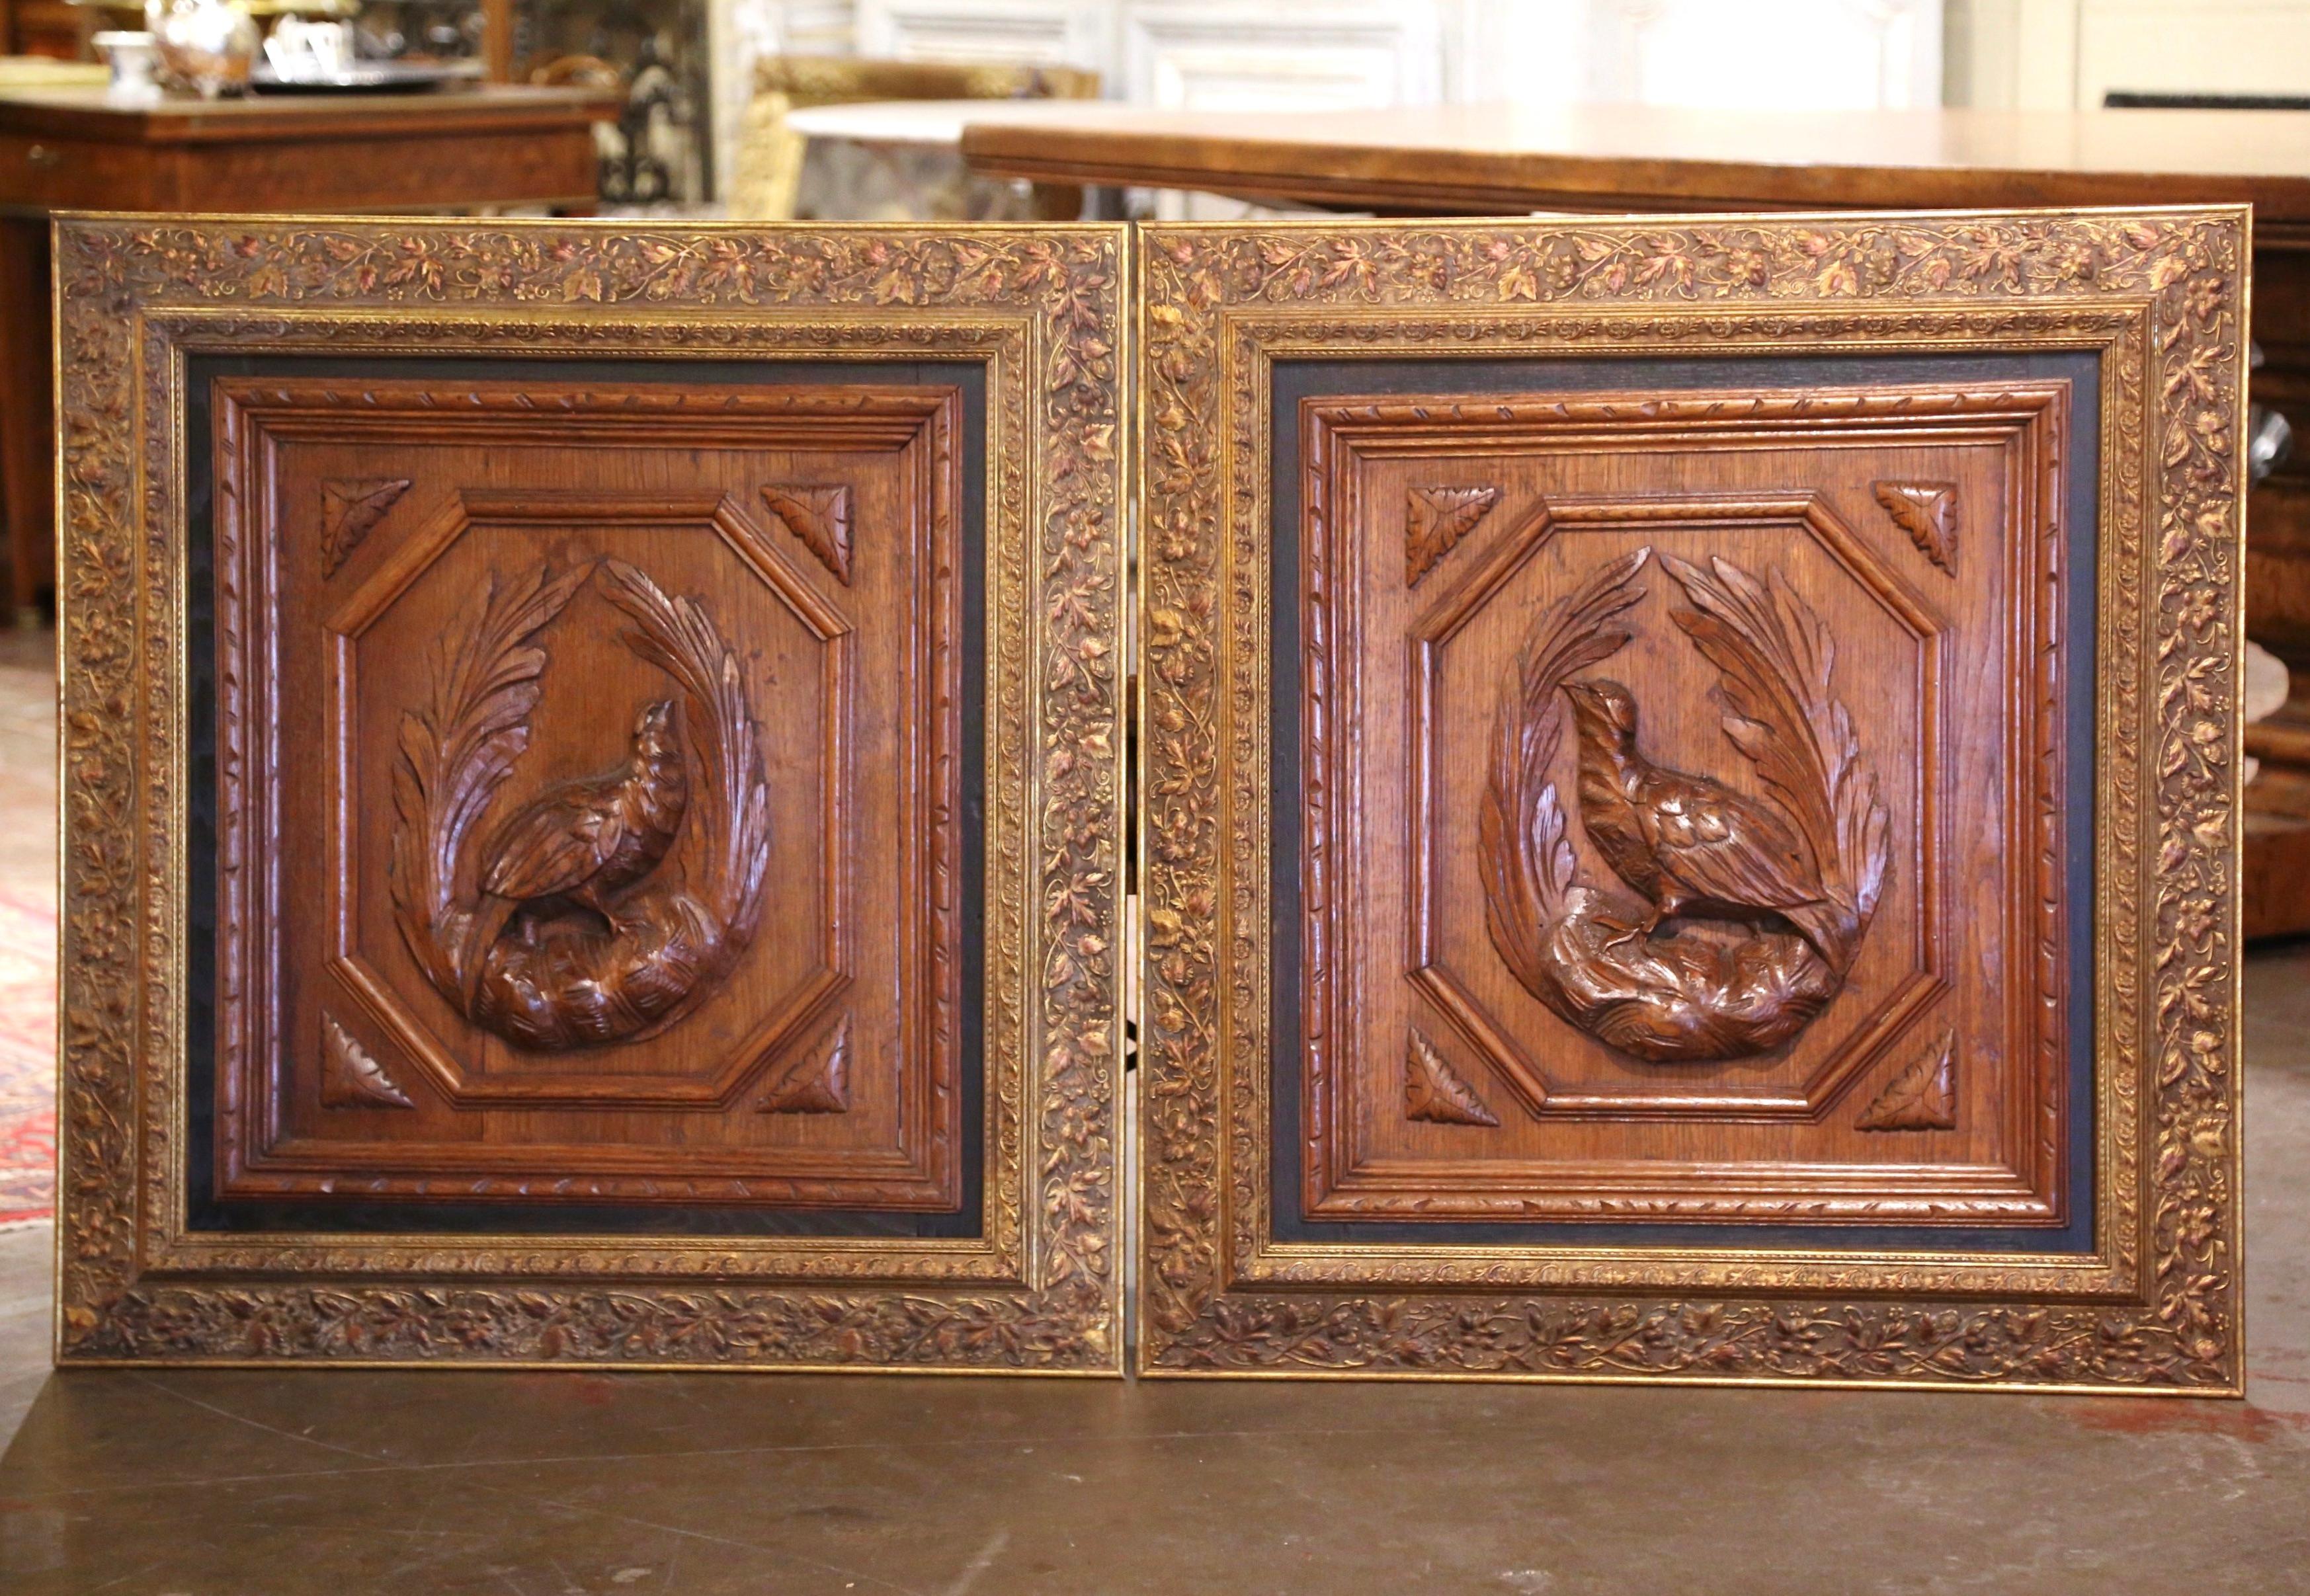 Decorate a man's office, a ranch or a hunting lodge with this pair of elegant antique wall plaques. Crafted in France circa 1870 and built of oak wood, and almost square in shape, the sculpted elements are decorated with exquisite carvings in high